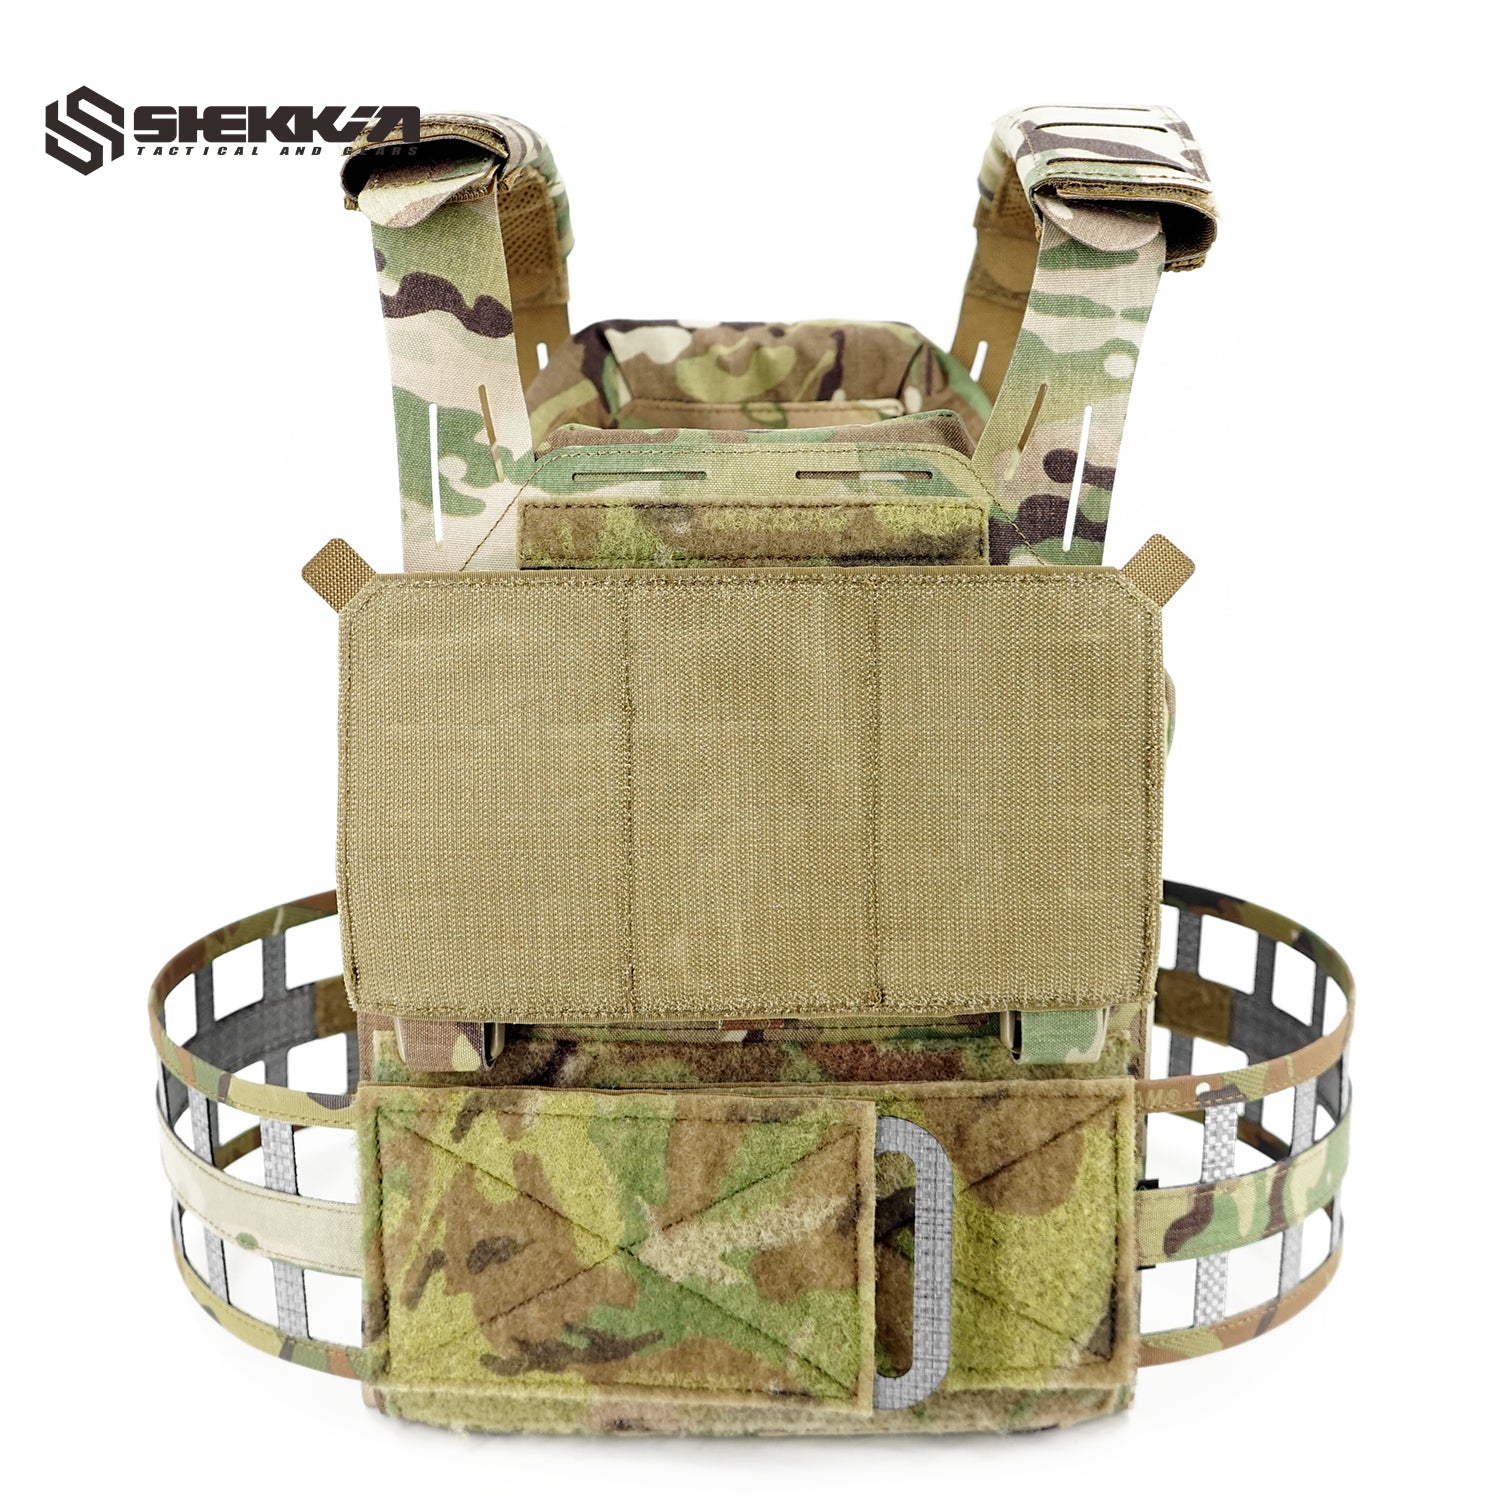 LBT style 6094G3 Plate carrier GBRS version